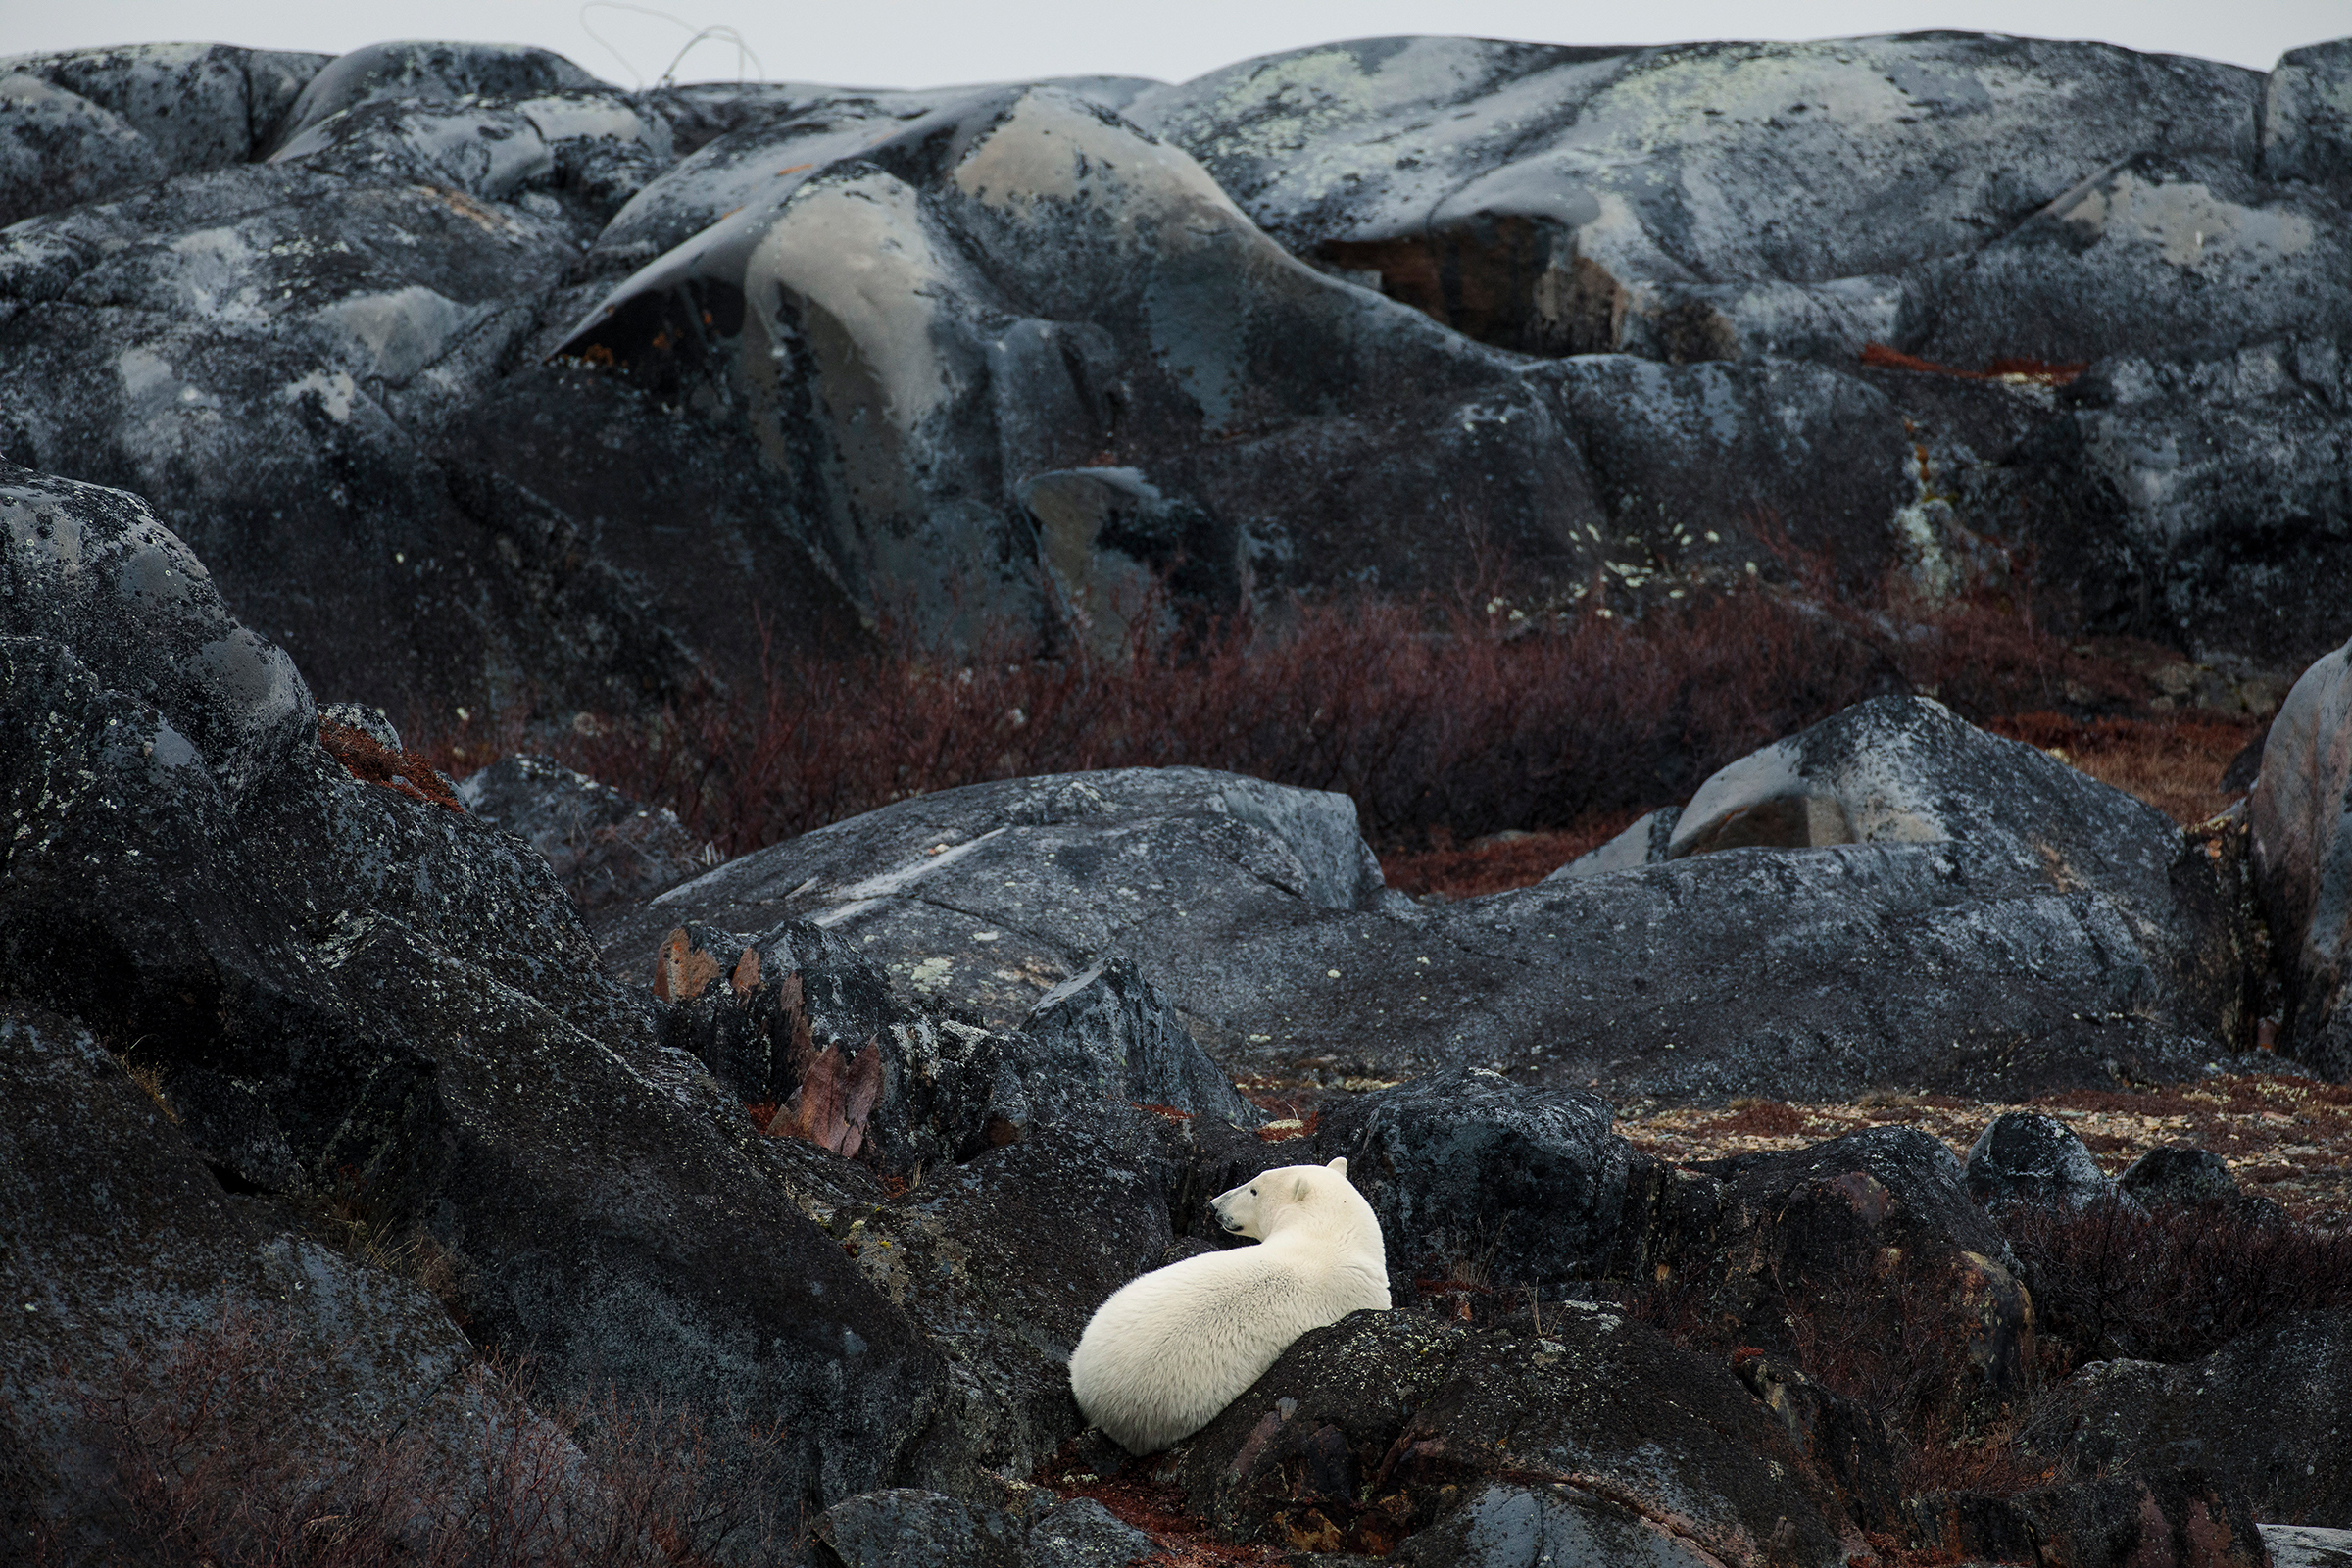 A polar bear nestles among the rocks of Bird Cove on the rugged coastline of Churchill, Manitoba, on Oct. 29. The Canadian town, situated in the south of the Arctic, has long billed itself as the polar-bear capital of the world. But warming temperatures have brought a sharp decline in bear numbers; without them, Carlene Spence, a cook at the Lazy Bear Lodge, told the New York <em>Times</em>, “we don’t make money.” (Damon Winter—The New York Times/Redux)